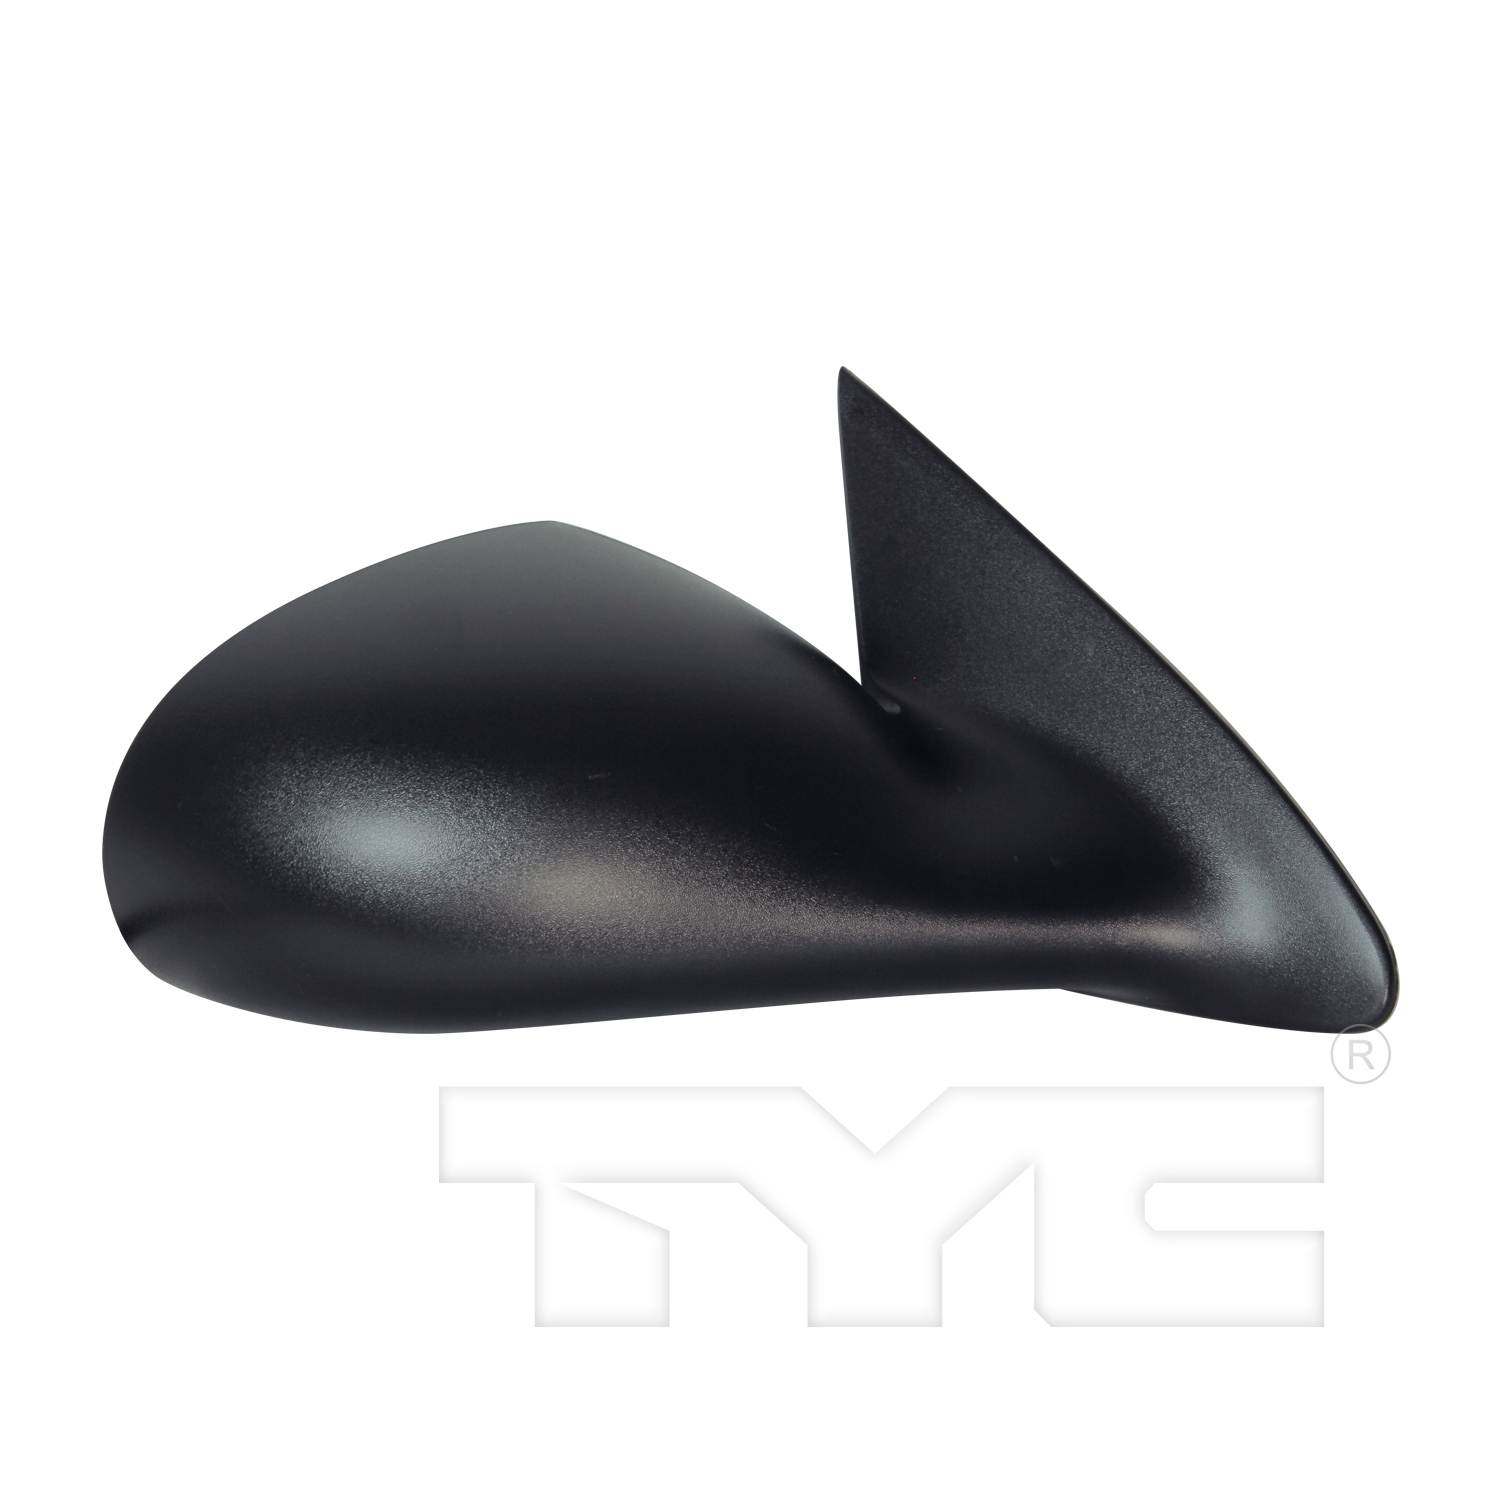 Aftermarket MIRRORS for CHRYSLER - 300M, 300M,99-00,RT Mirror outside rear view